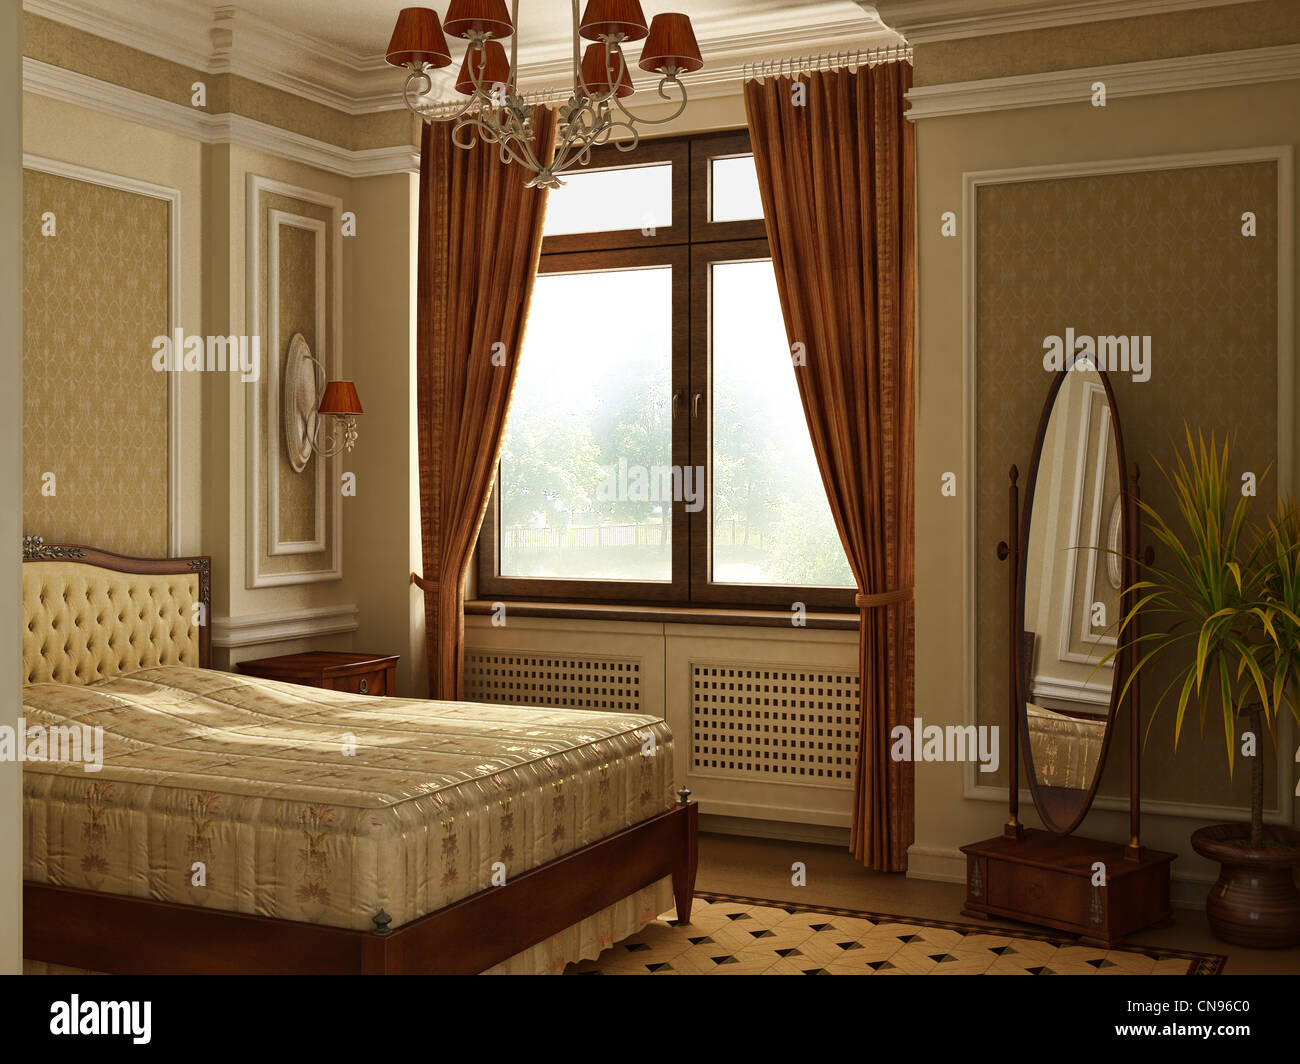 Classic antique style bedroom. With window. Stock Photo